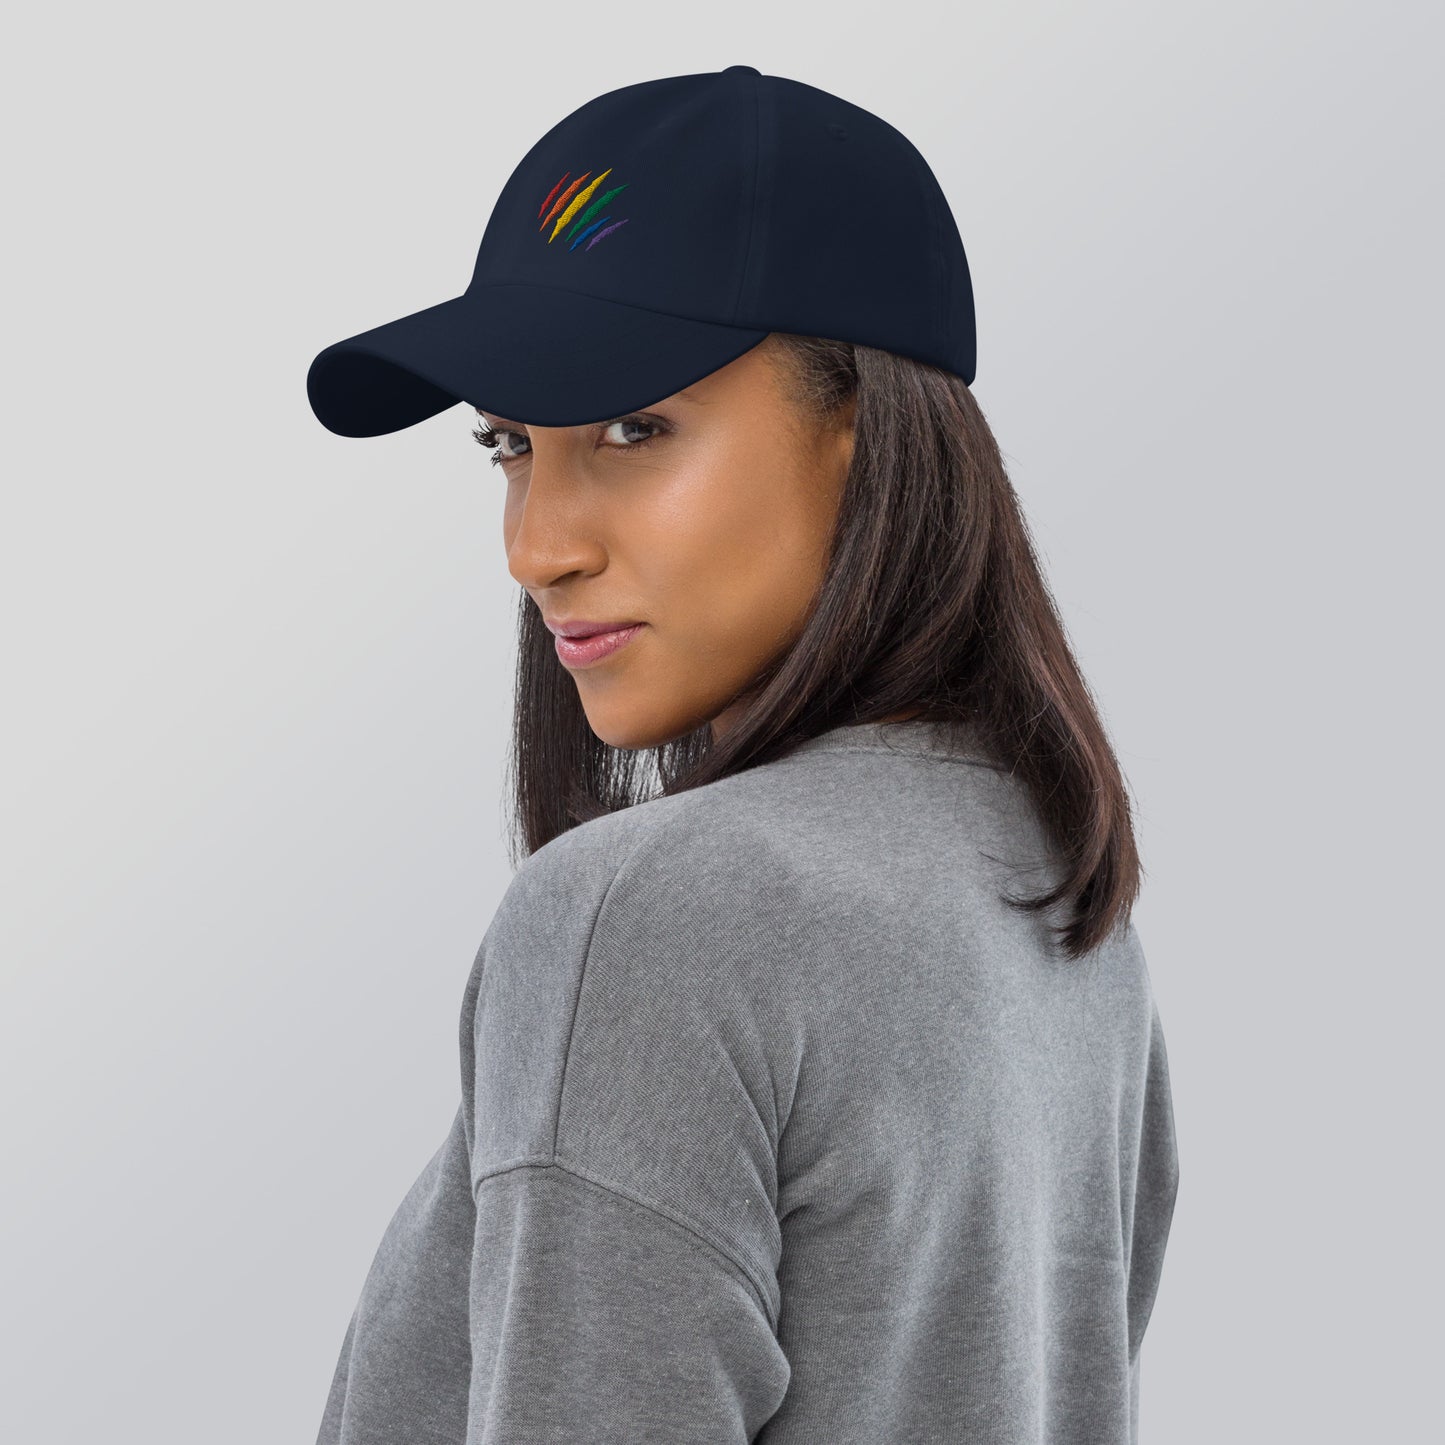 A model wearing our navy baseball hat featuring rainbow pride scratch mark embroidery with a low profile, adjustable strap.